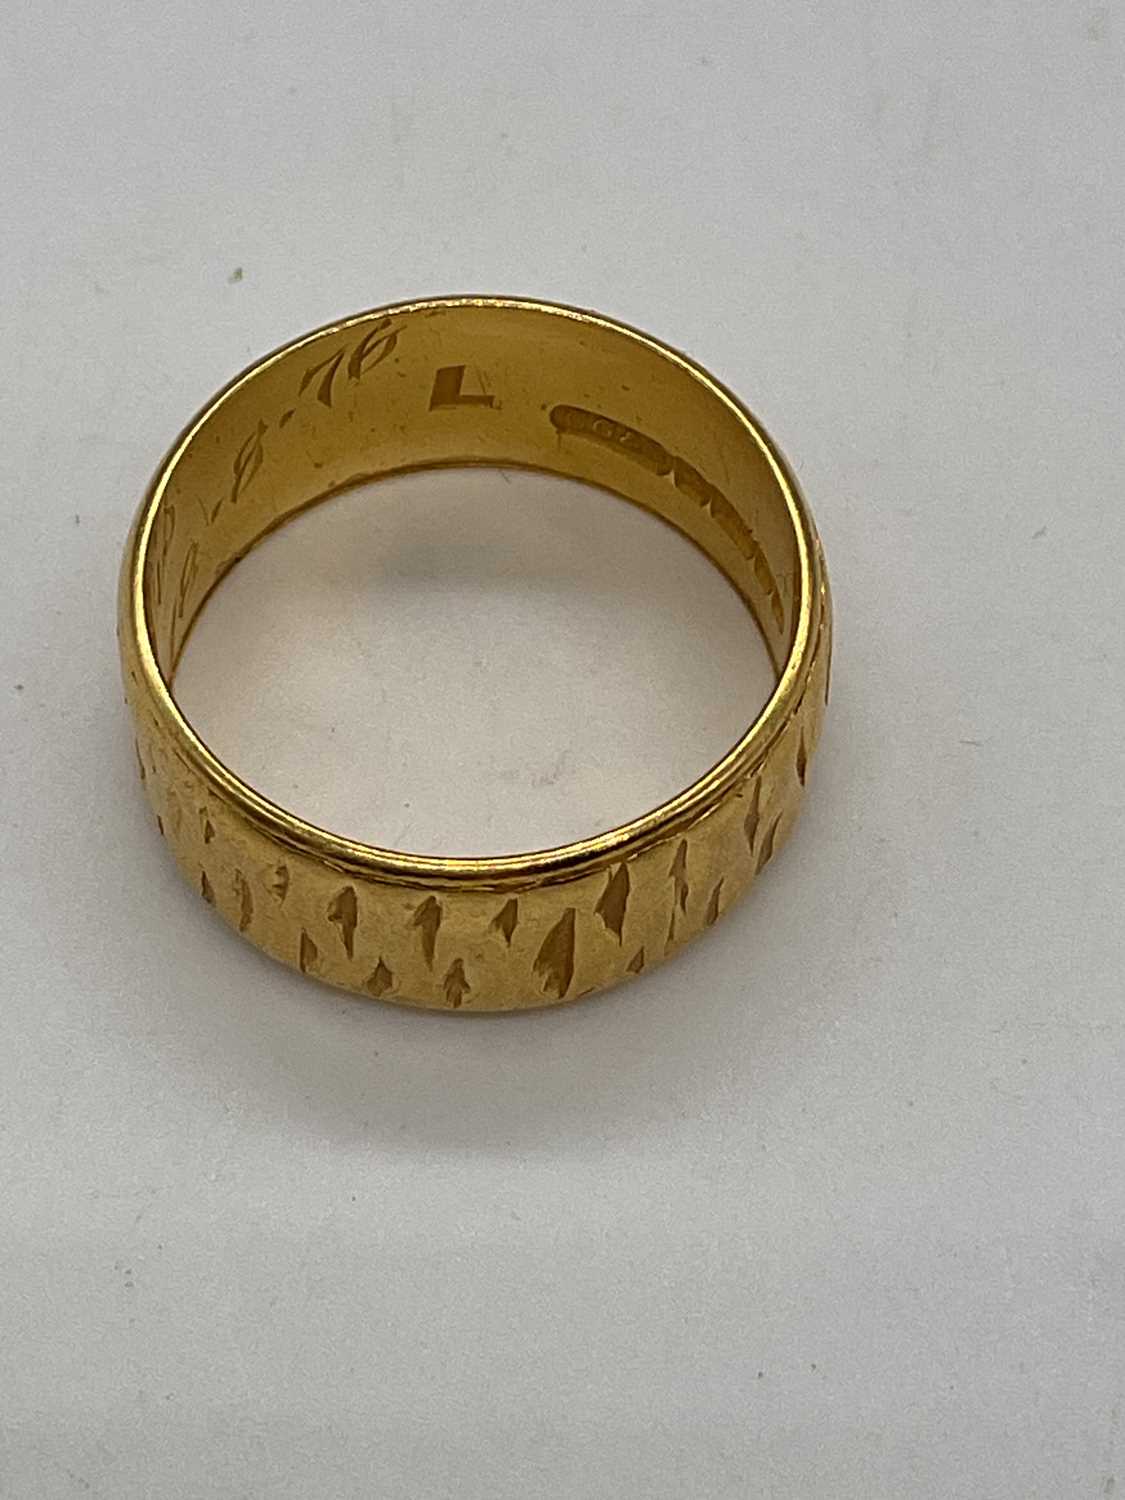 A 22ct yellow gold wedding band with engraved detail and inscription to the inner band, size K 1/ - Image 4 of 4